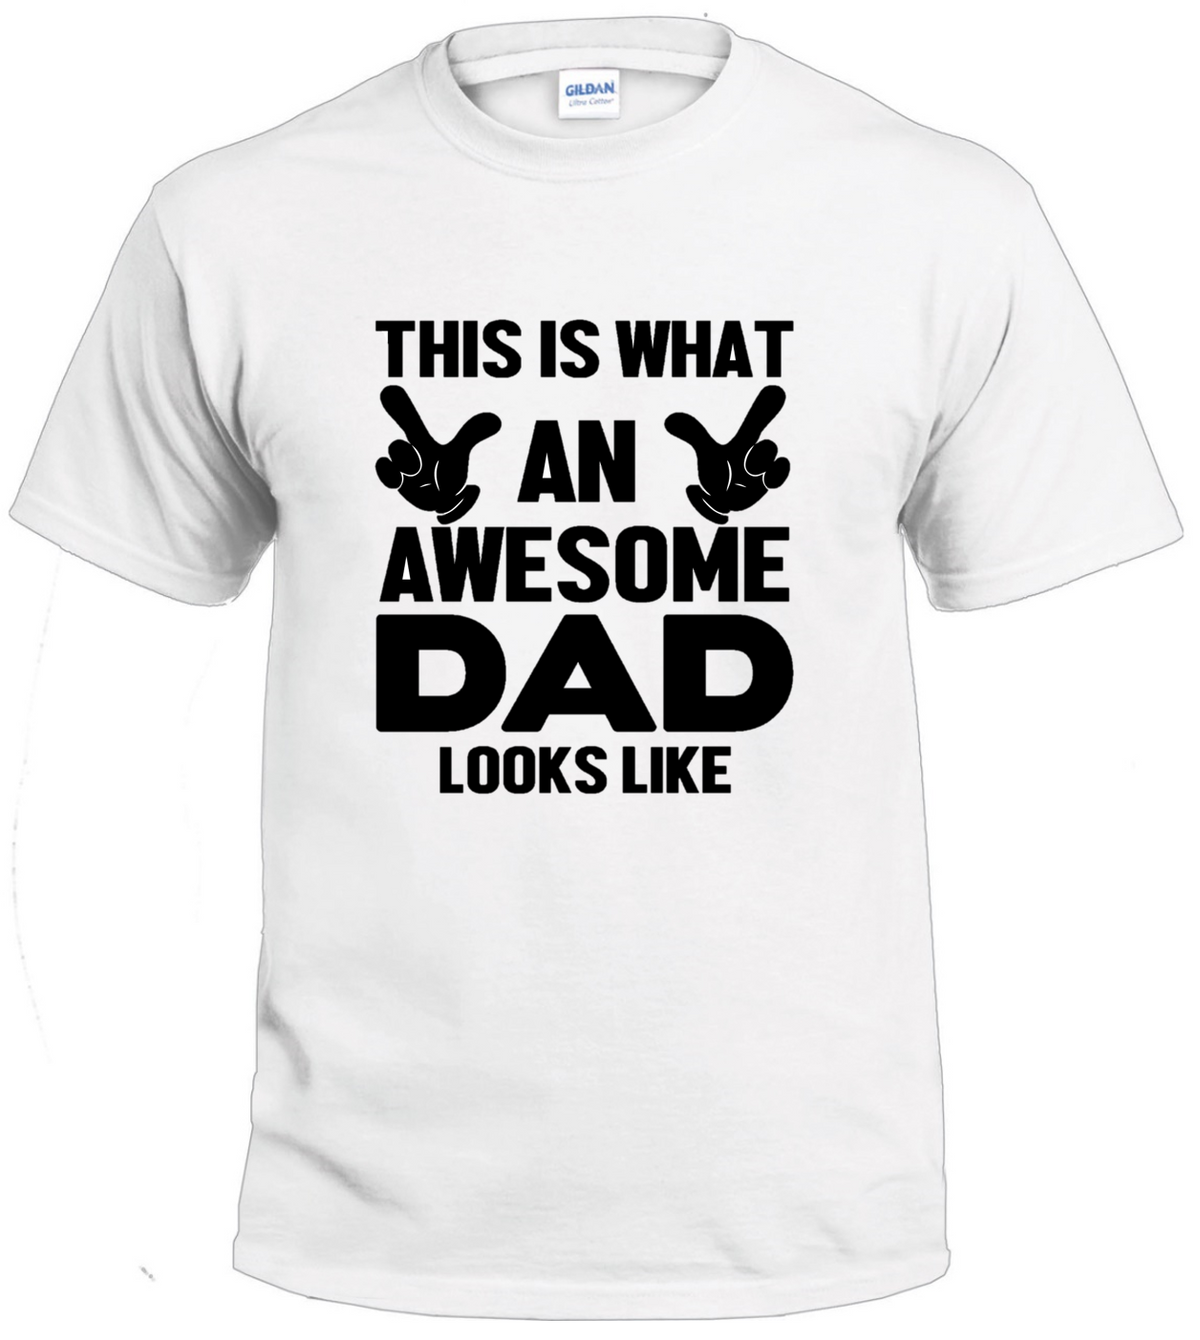 This is What An Awesome Dad Looks Like t-shirt